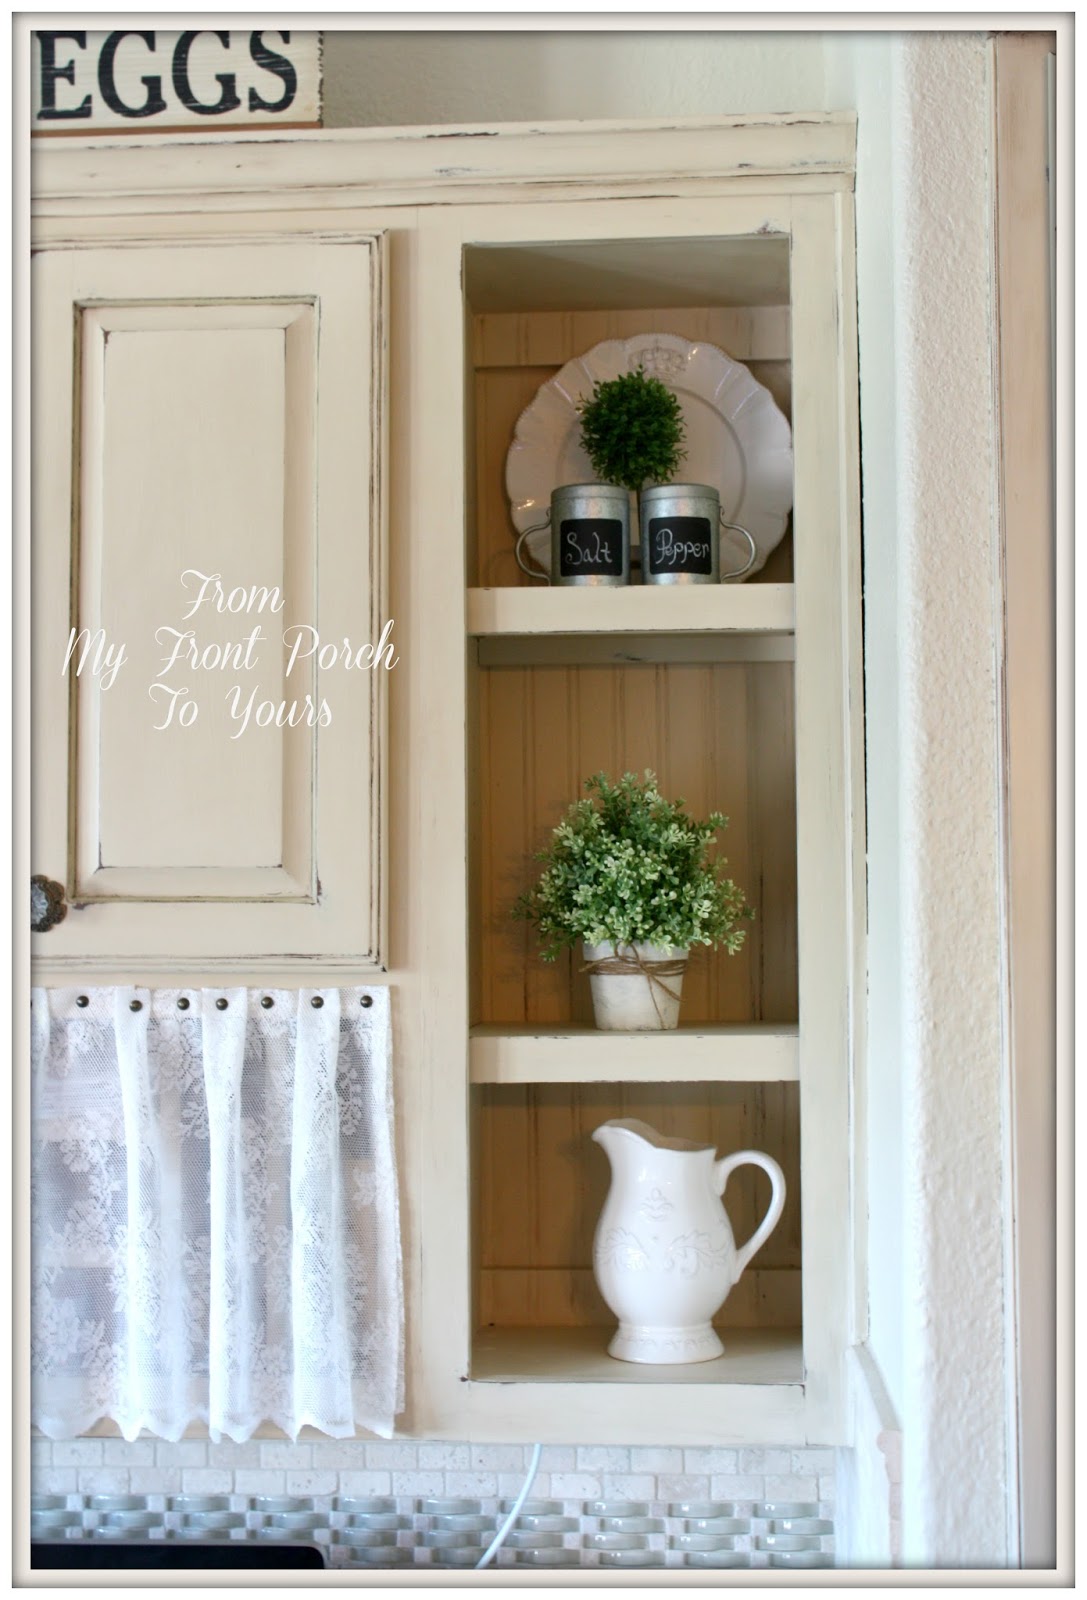 From My Front Porch To Yours: French Farmhouse DIY Kitchen Makeover